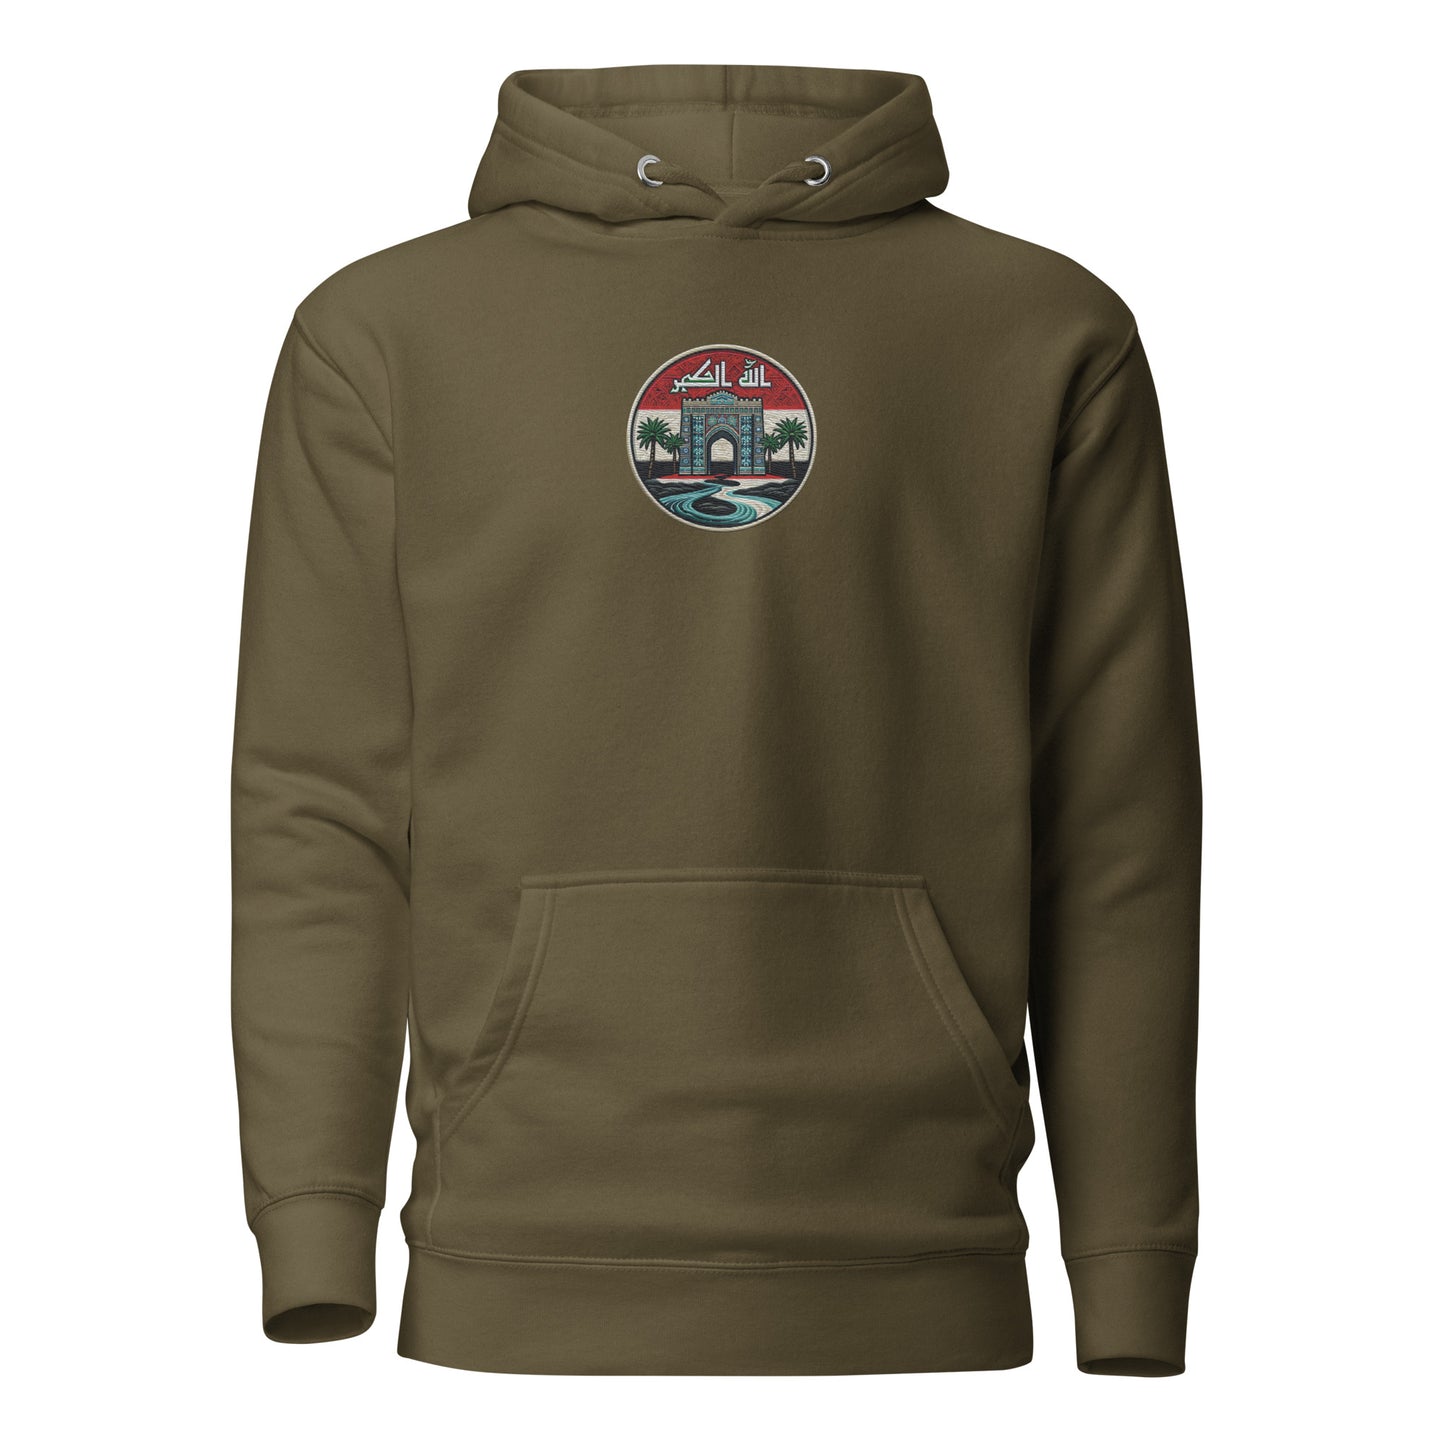 Iraqi Patch 001 Hoodie By Halal Cultures